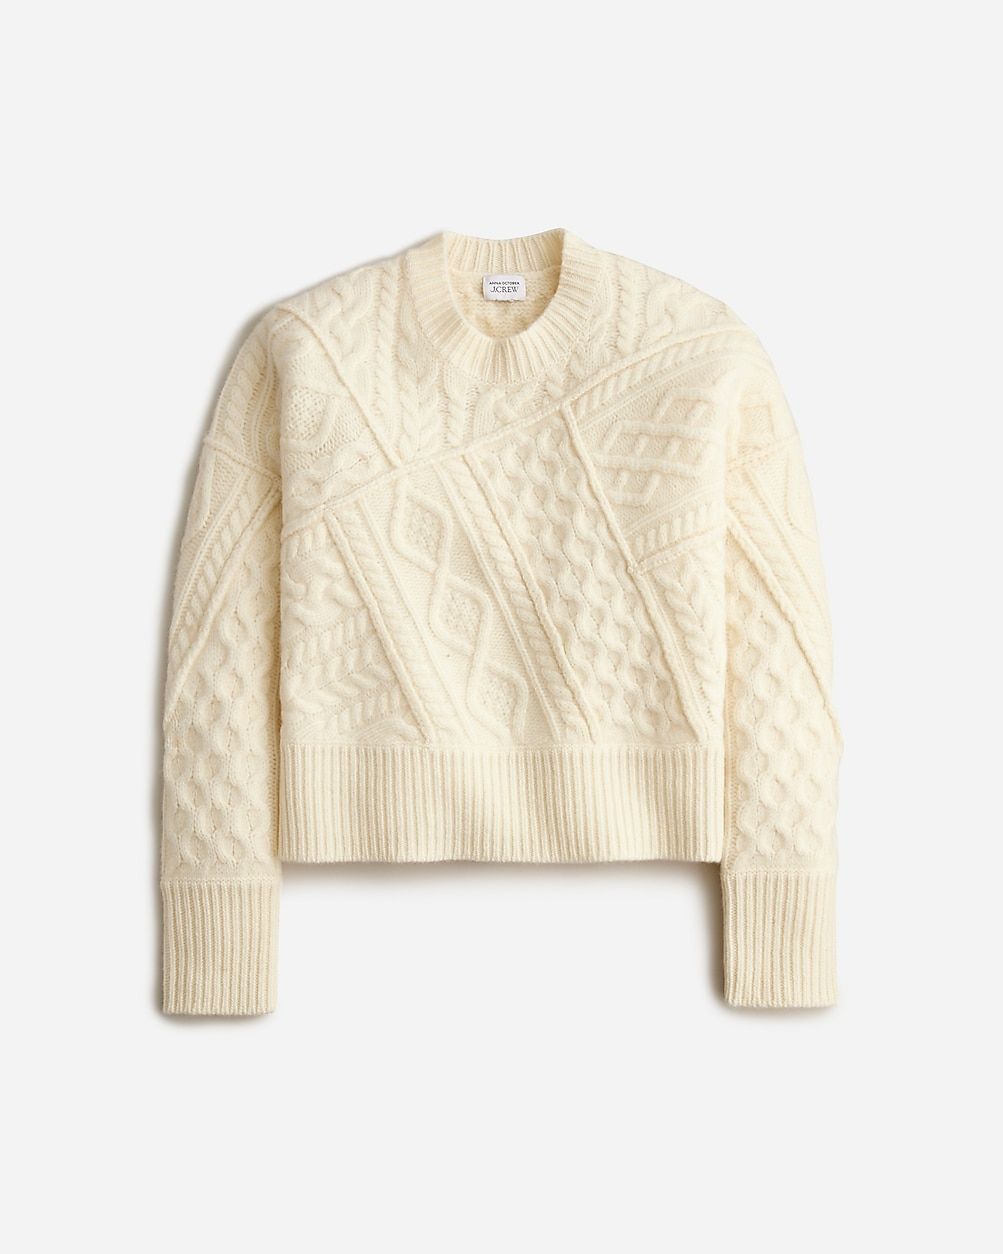 Limited-edition Anna October© X J.Crew patchwork cable-knit crewneck sweater | J.Crew US